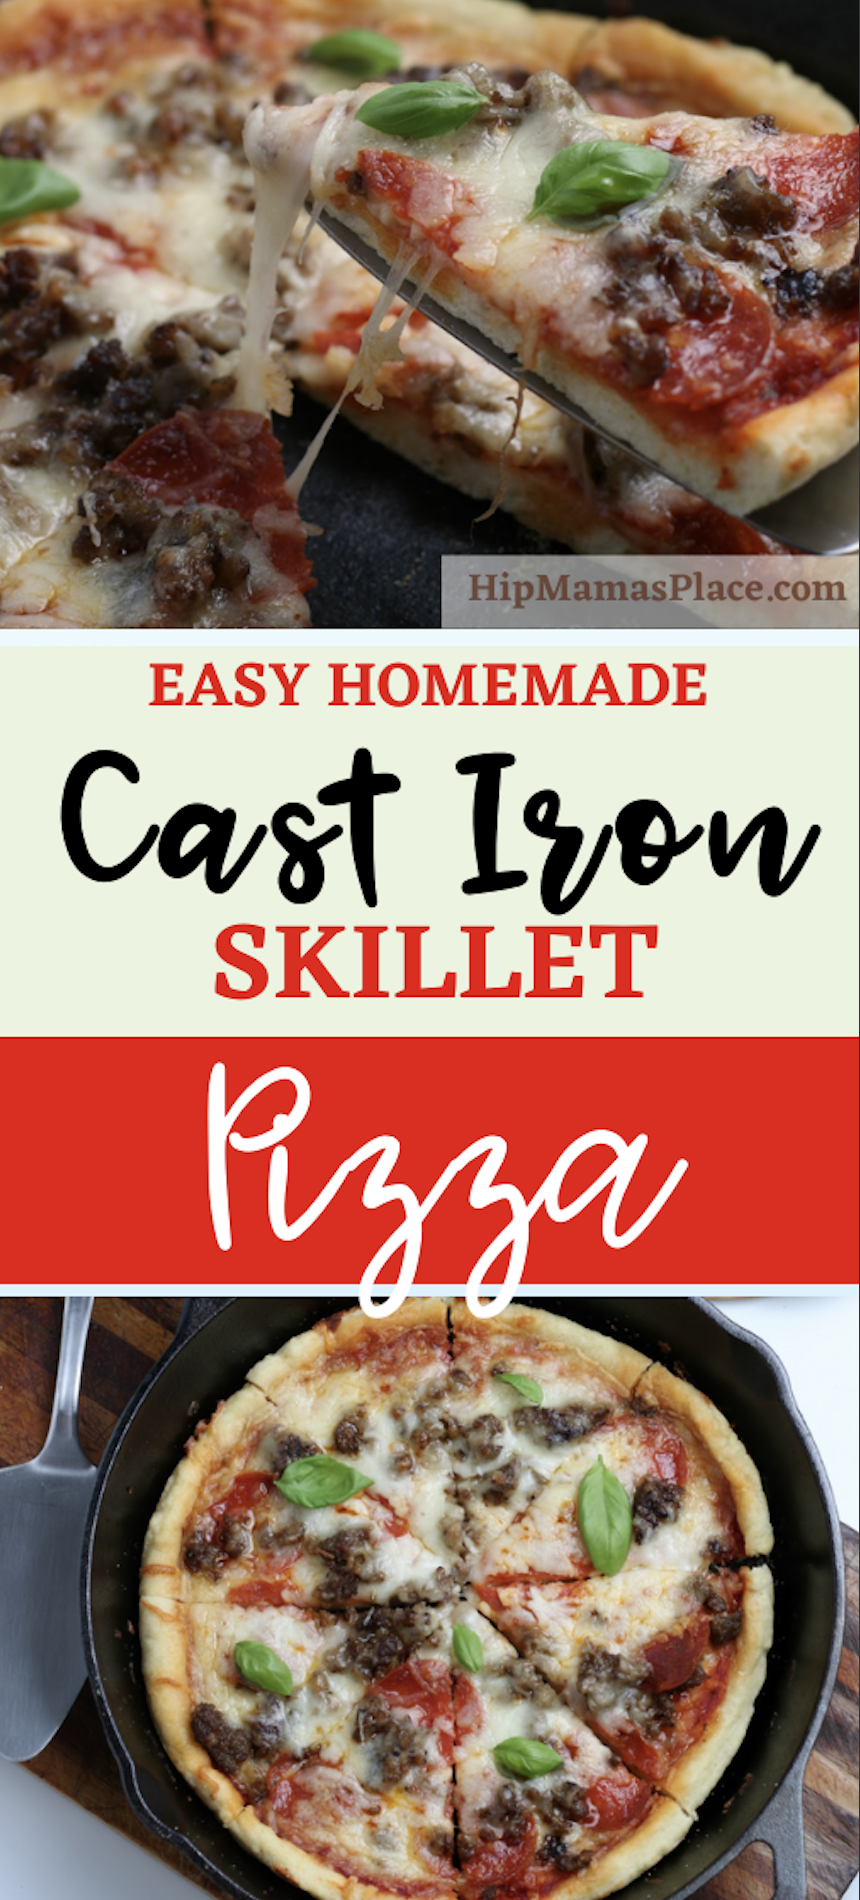 This quick, easy homemade Cast Iron Skillet Pizza recipe is the best homemade pizza you'll ever make! Get my recipe and try it today! 